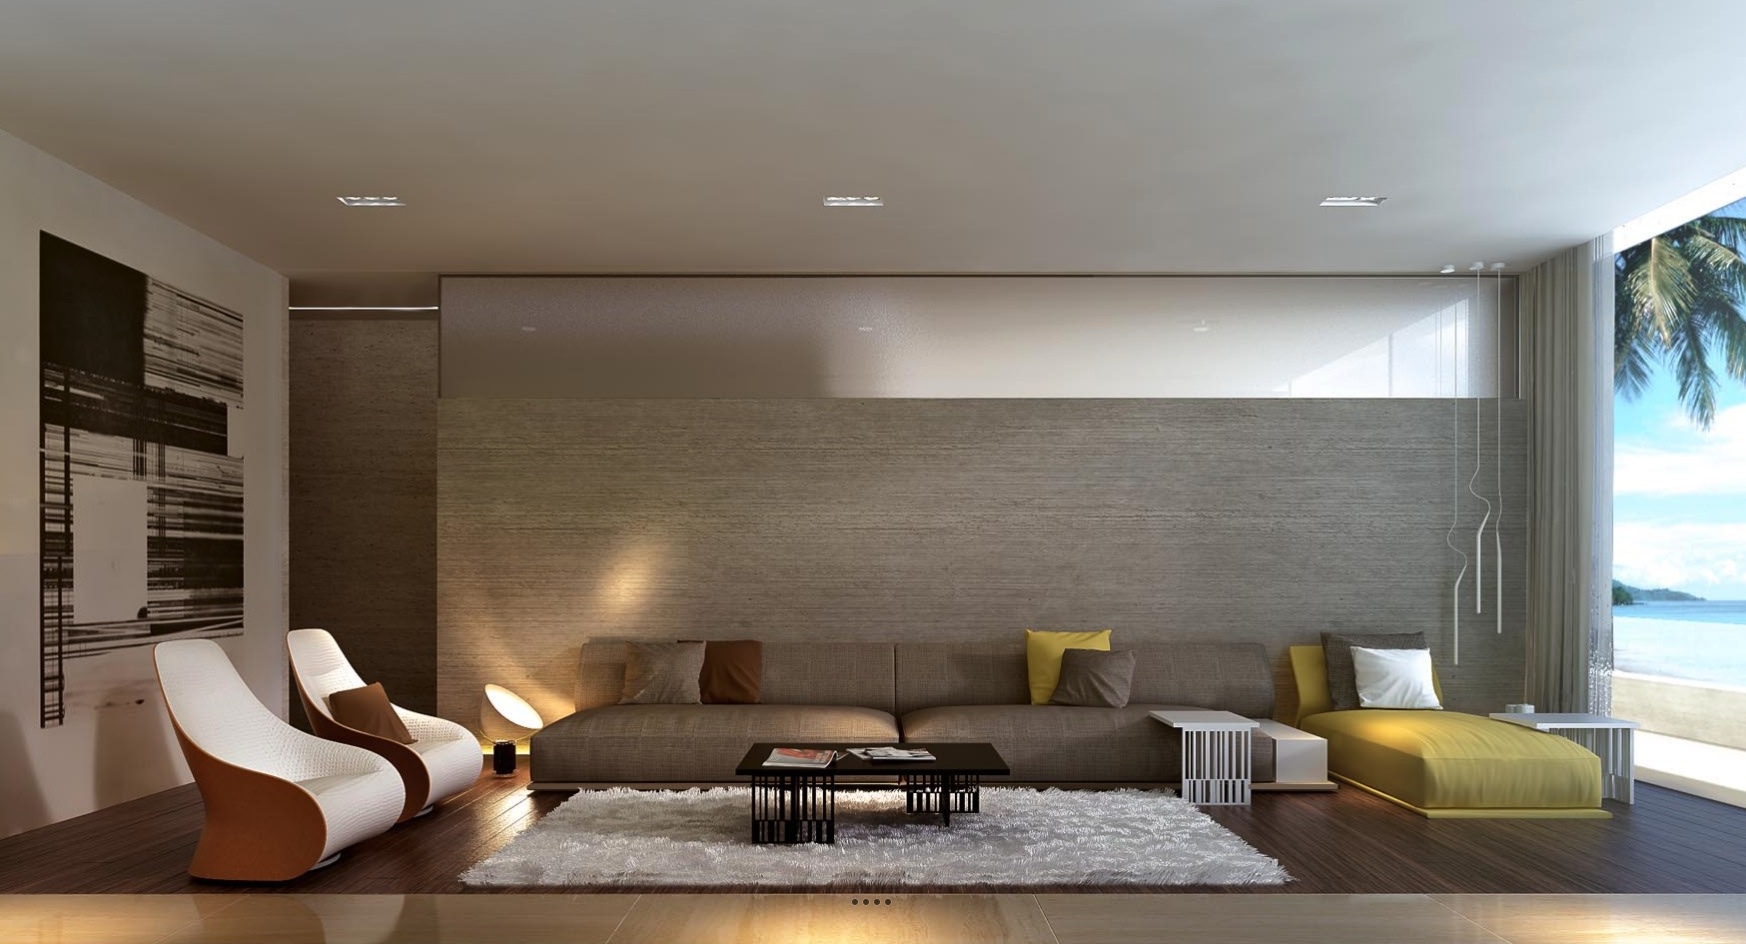 amazing living room design "width =" 1746 "height =" 944 "srcset =" https://mileray.com/wp-content/uploads/2020/05/1588517209_371_Decorating-Living-Room-Design-Ideas-With-An-Eclectic-Decor-Looks.jpeg 1746w, https://mileray.com / wp -content / uploads / 2016/08 / Mimar-Interiors1-300x162.jpeg 300w, https://mileray.com/wp-content/uploads/2016/08/Mimar-Interiors1-768x415.jpeg 768w, https: / / myfashionos .com / wp-content / uploads / 2016/08 / Mimar-Interiors1-1024x554.jpeg 1024w, https://mileray.com/wp-content/uploads/2016/08/Mimar-Interiors1-696x376.jpeg 696w, https : //mileray.com/wp-content/uploads/2016/08/Mimar-Interiors1-1068x577.jpeg 1068w, https://mileray.com/wp-content/uploads/2016/08/Mimar-Interiors1- 777x420. jpeg 777w "sizes =" (maximum width: 1746px) 100vw, 1746px